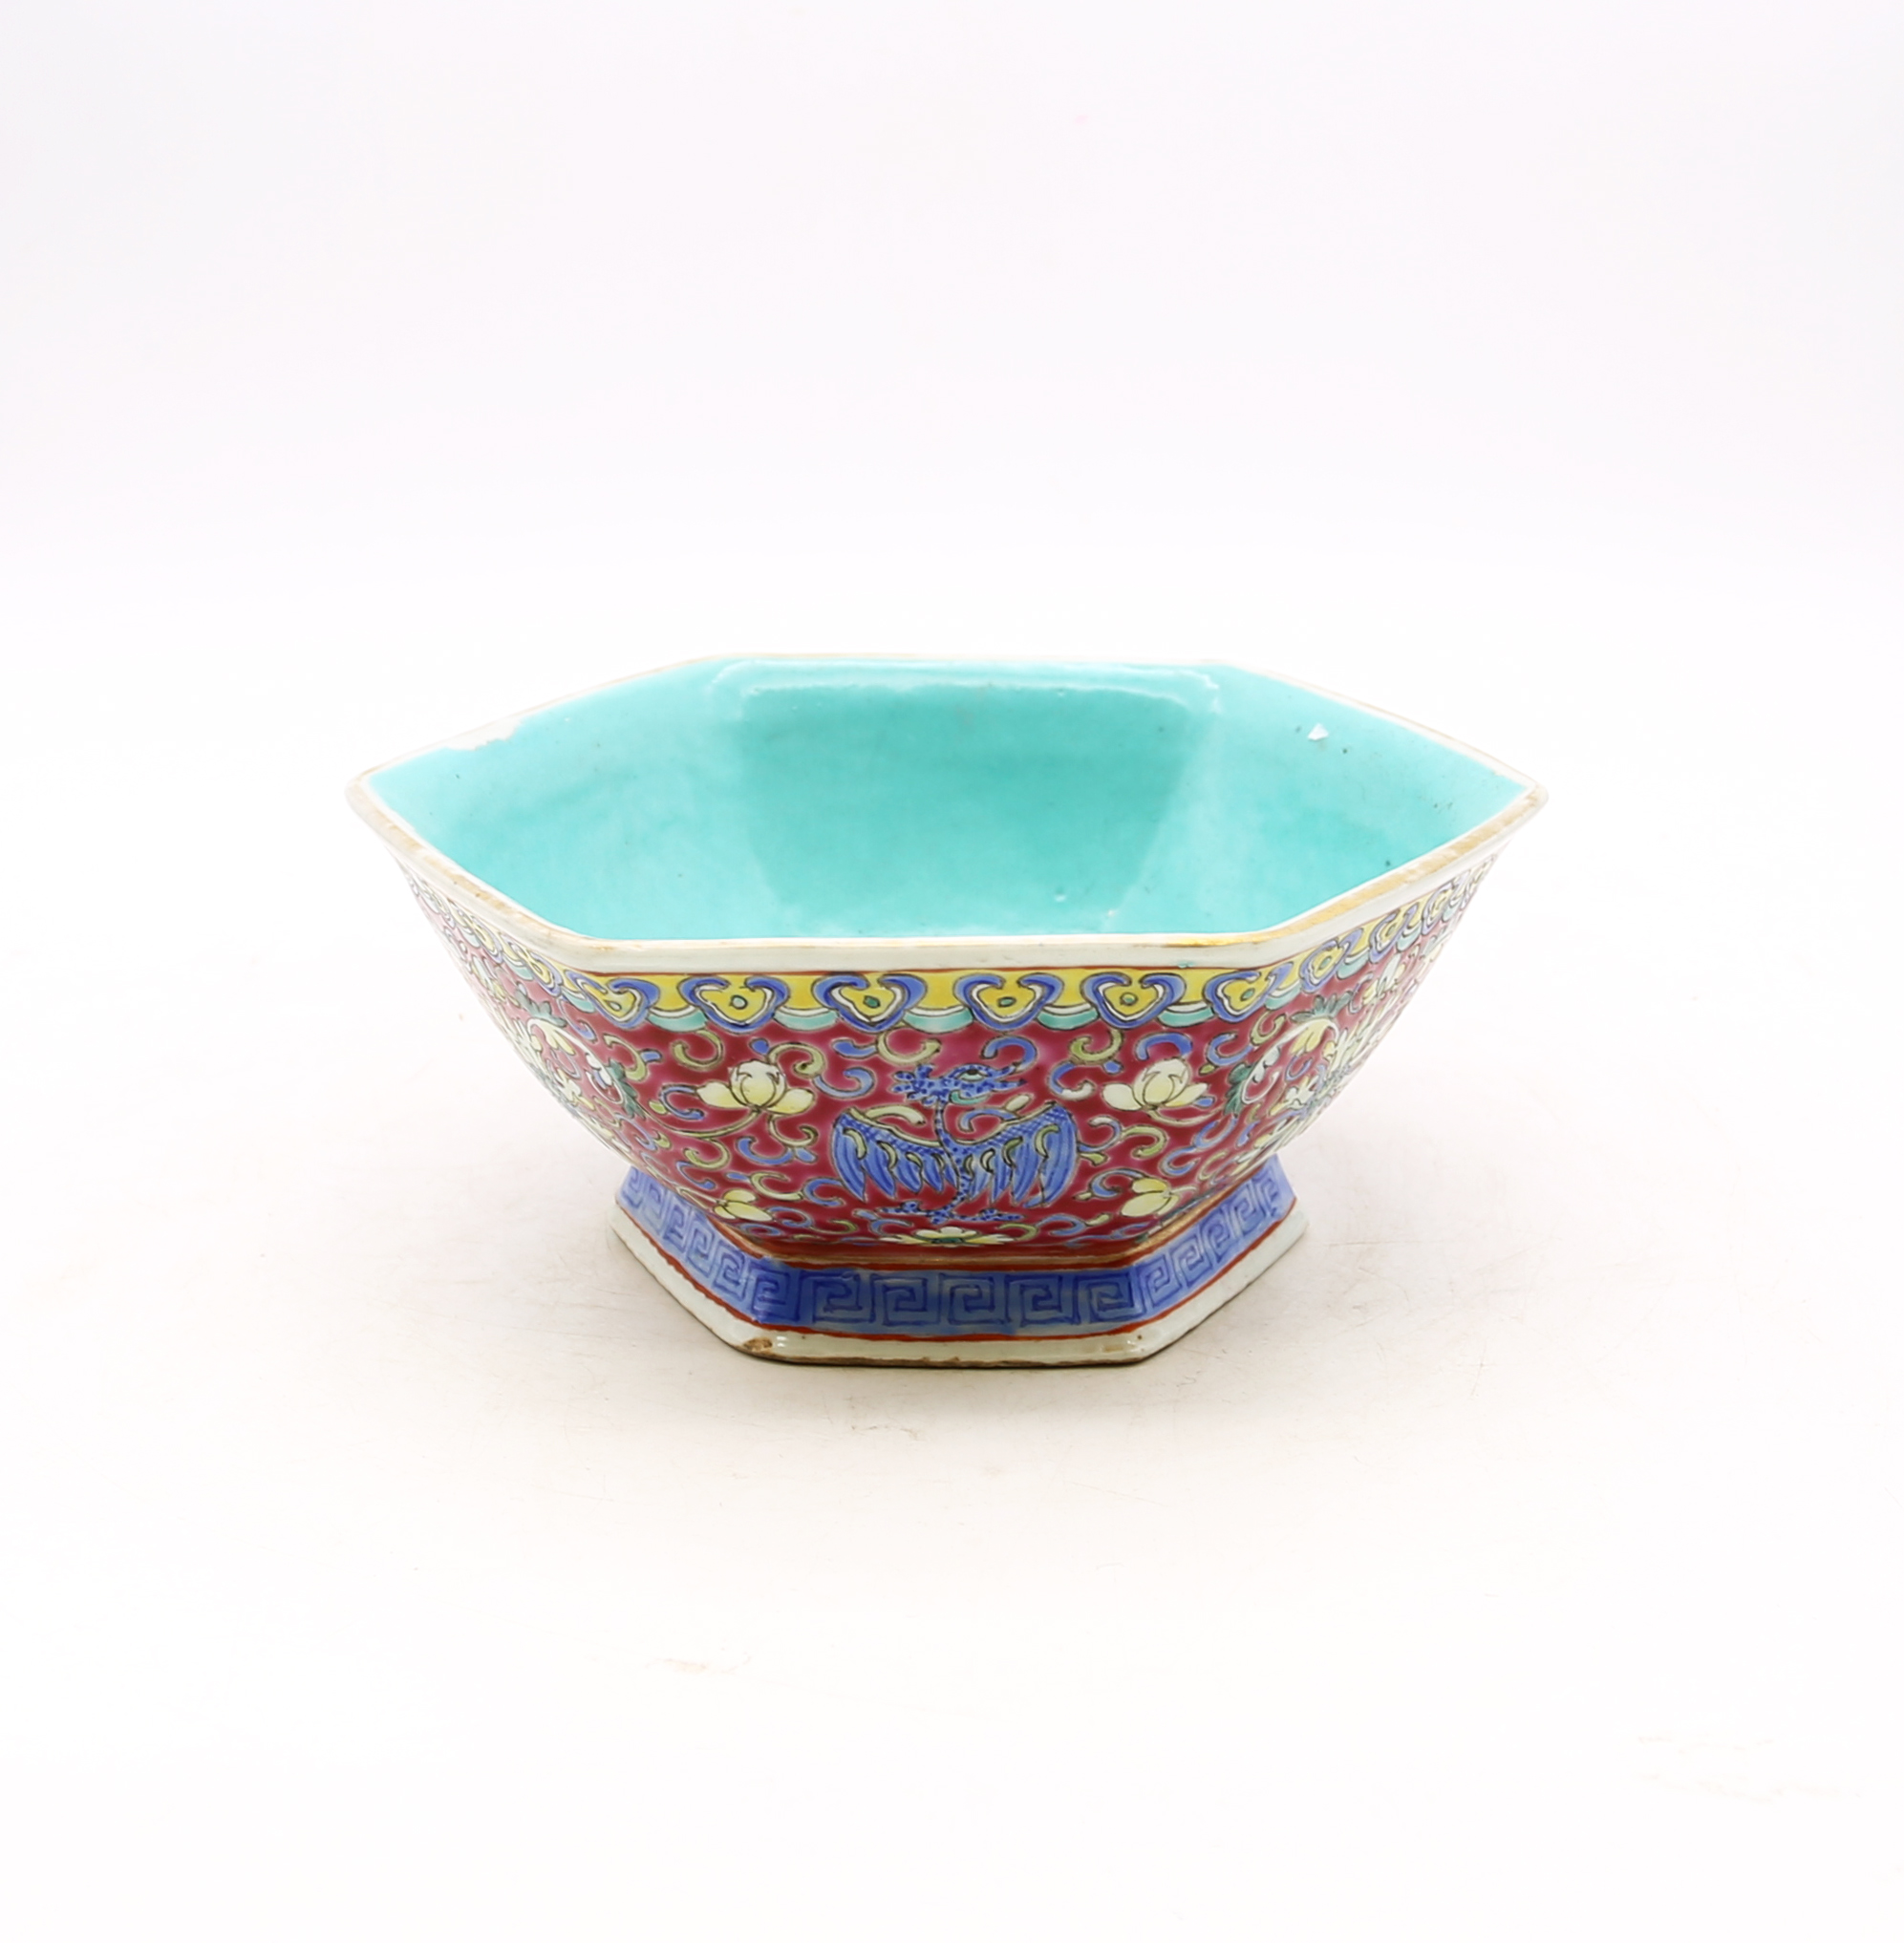 A Chinese polychrome porcelain bowl, late 19th century, comprising a hexagonal form, decorated